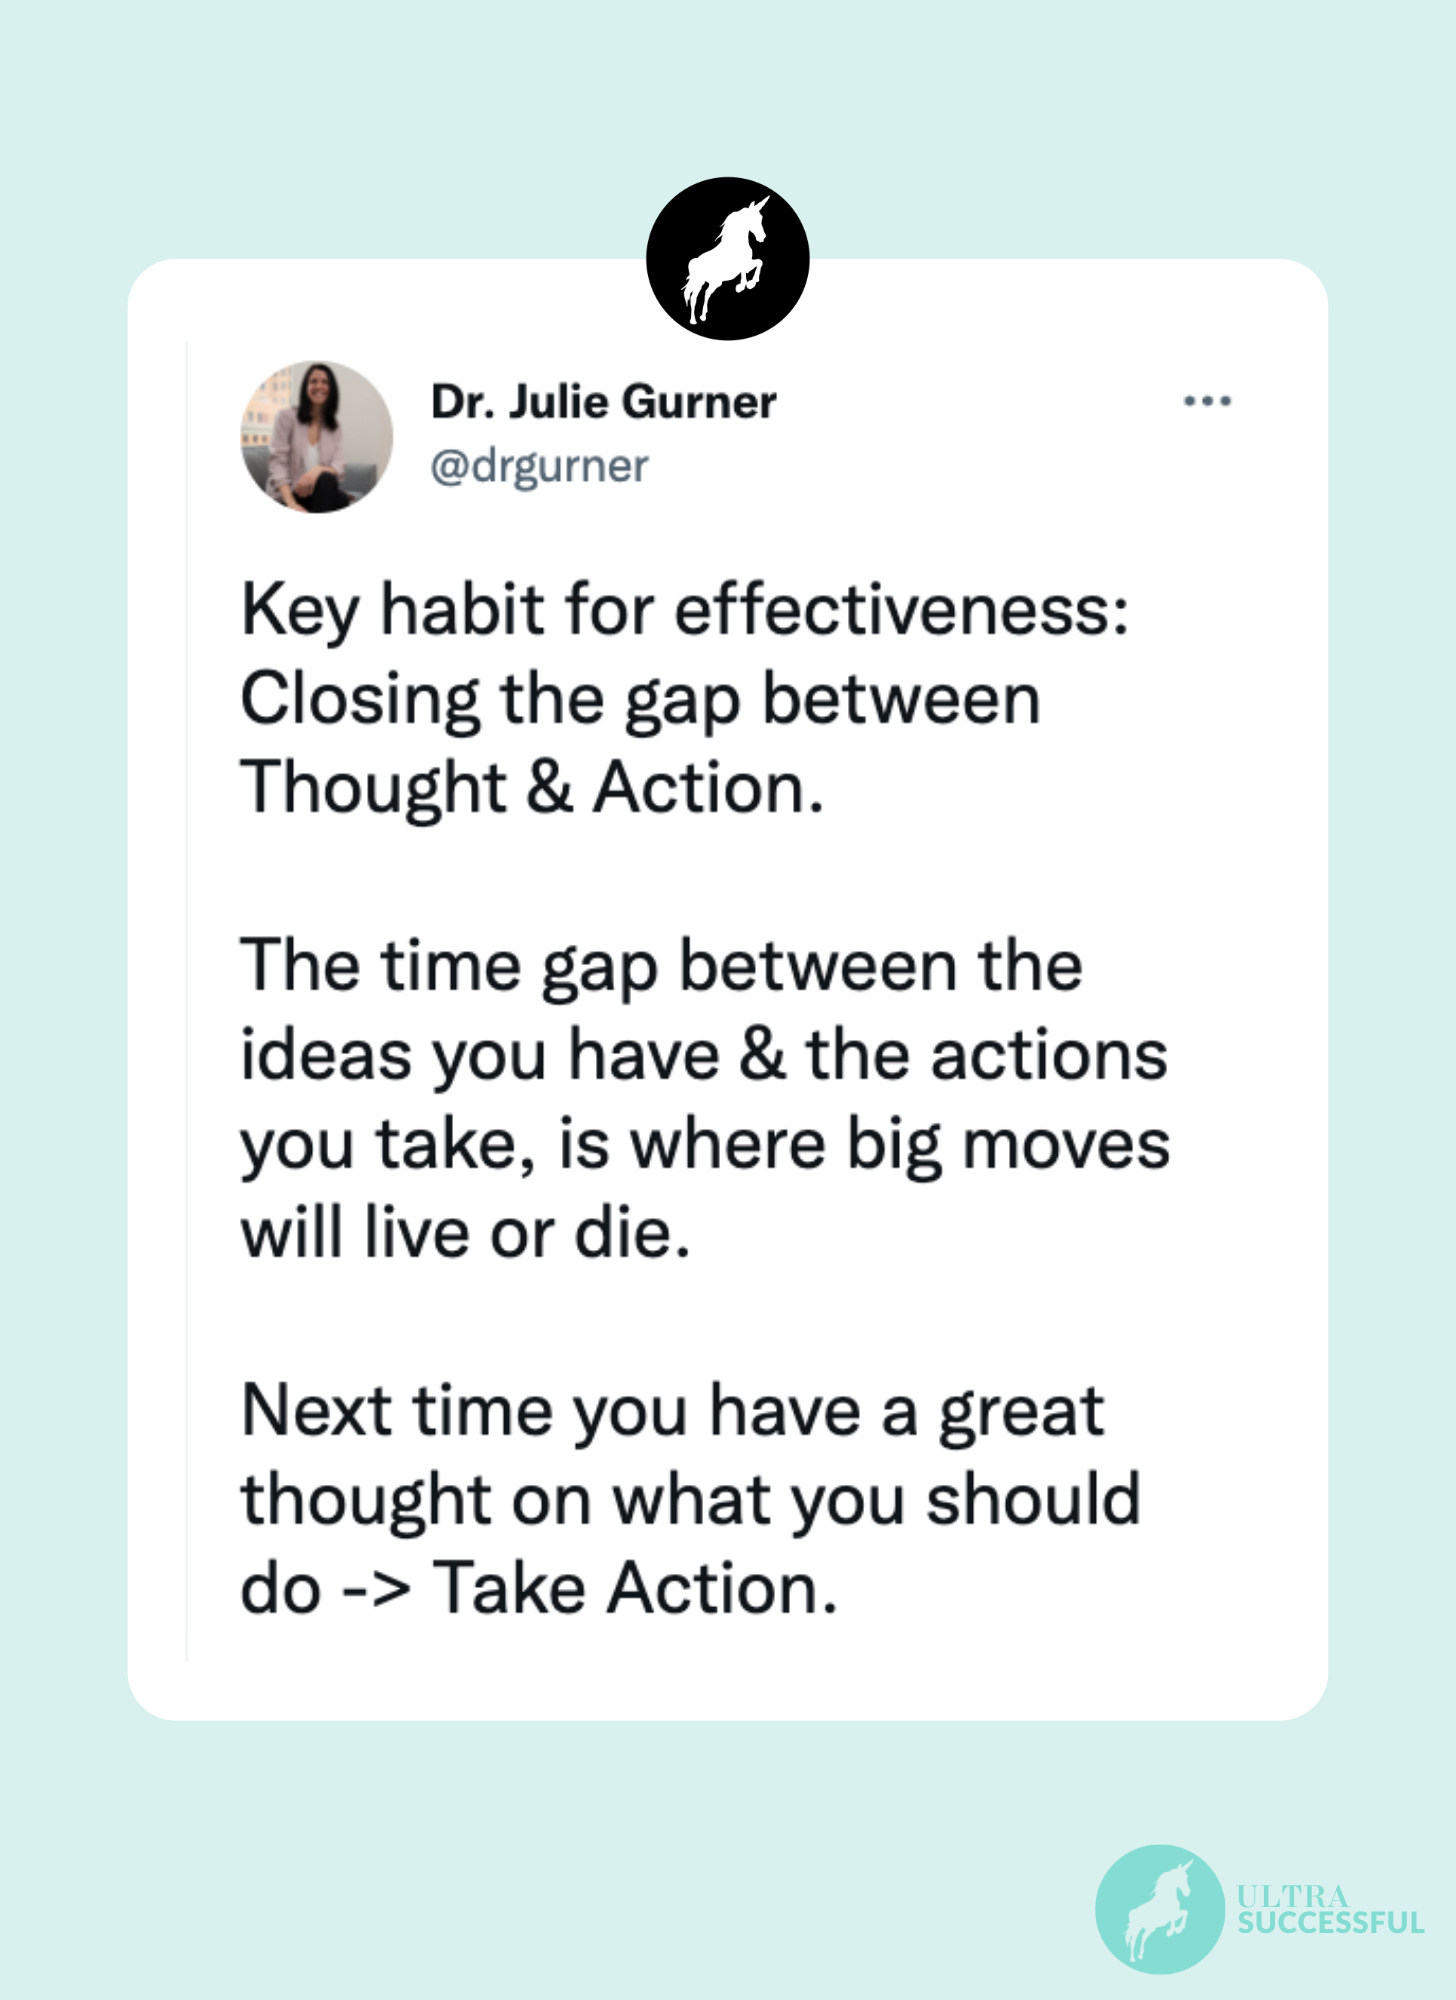 @drgurner: Key habit for effectiveness: Closing the gap between Thought & Action.   The time gap between the ideas you have & the actions you take, is where big moves will live or die.  Next time you have a great thought on what you should do -> Take Action.